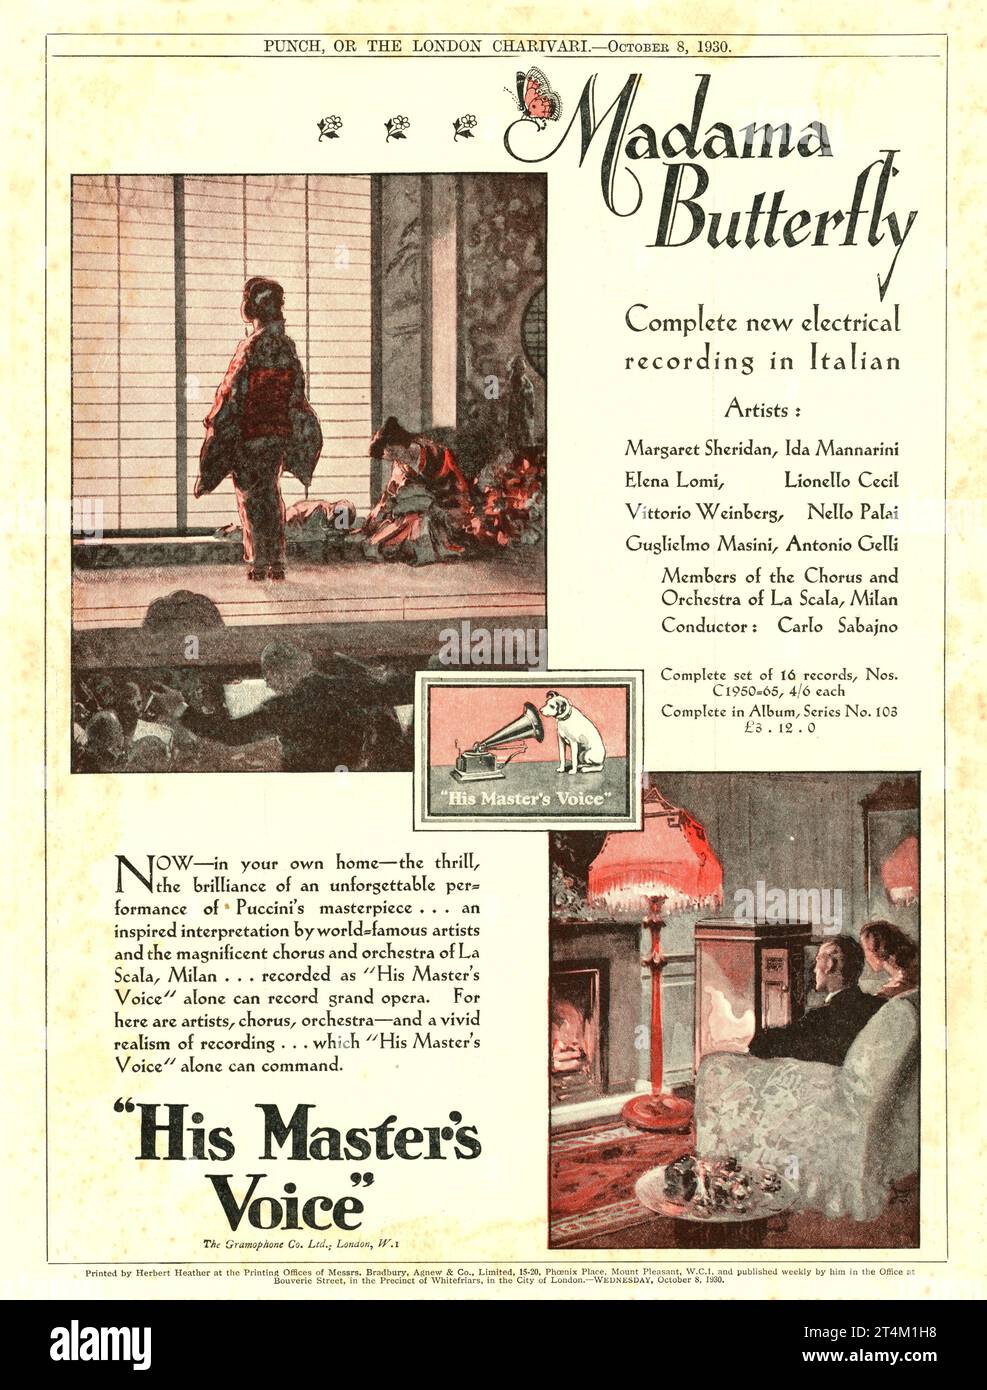 MADAME / MADAMA BUTTERFLY Complete New 16 Record Set of Electrical Recording in Italian with singers chorus and orchestra of La Scala, Milan conductor Carlo Sabajno 1930 British Magazine Advertisement for HIS MASTER'S VOICE (HMV) Stock Photo